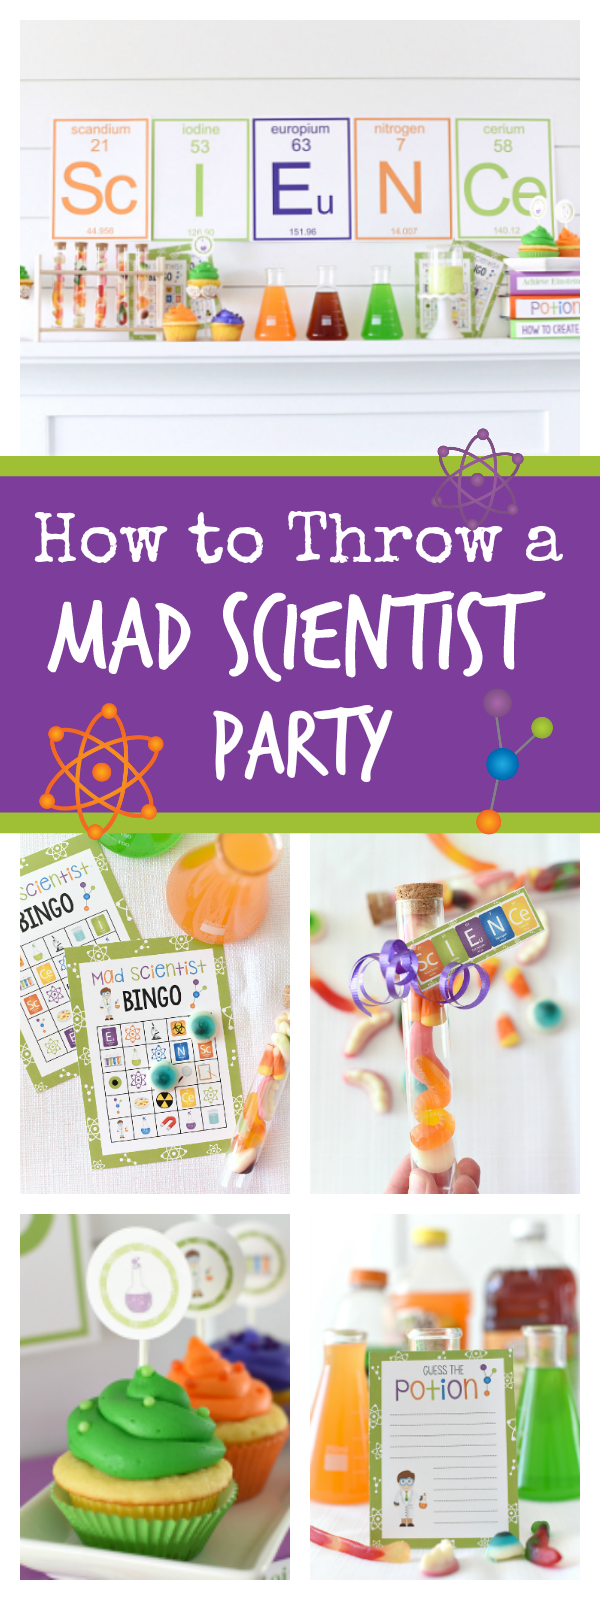 How to Throw a Fun Mad Scientist Party